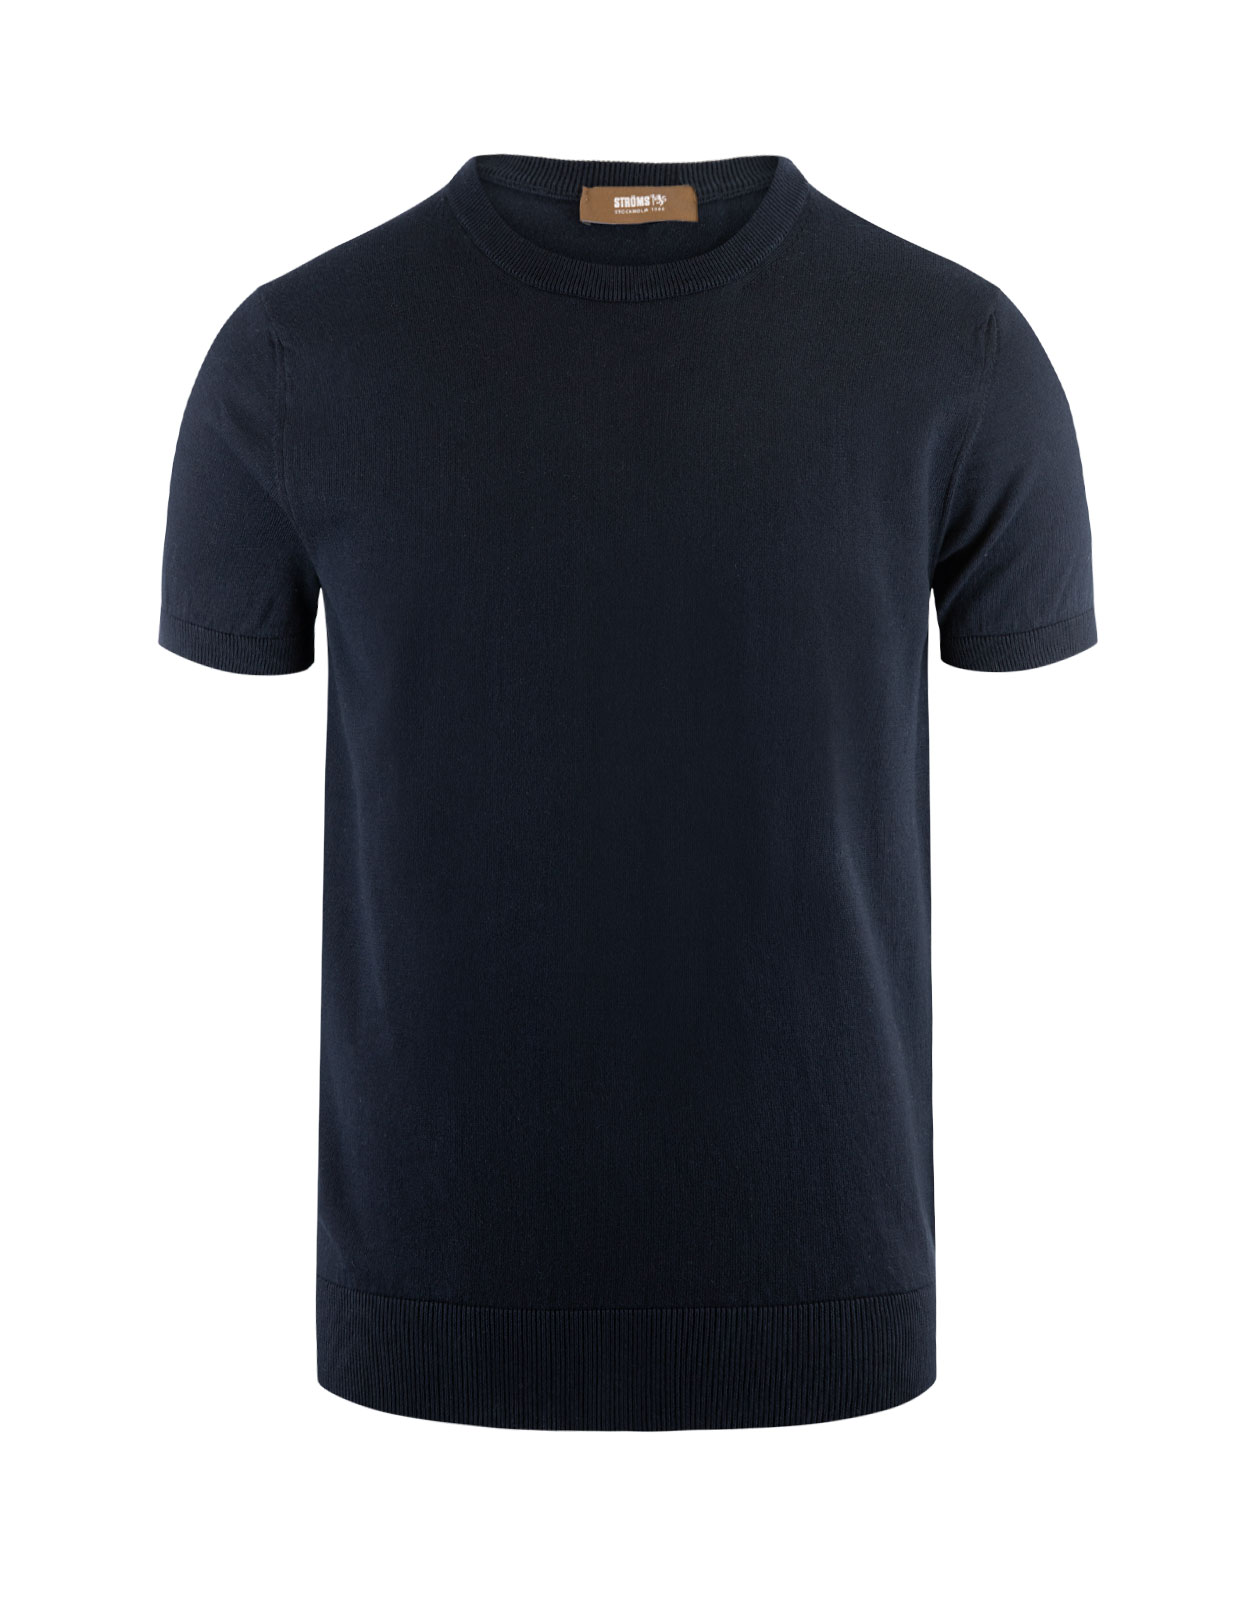 New T-Shirt Fine Knitted Cotton Blue Navy